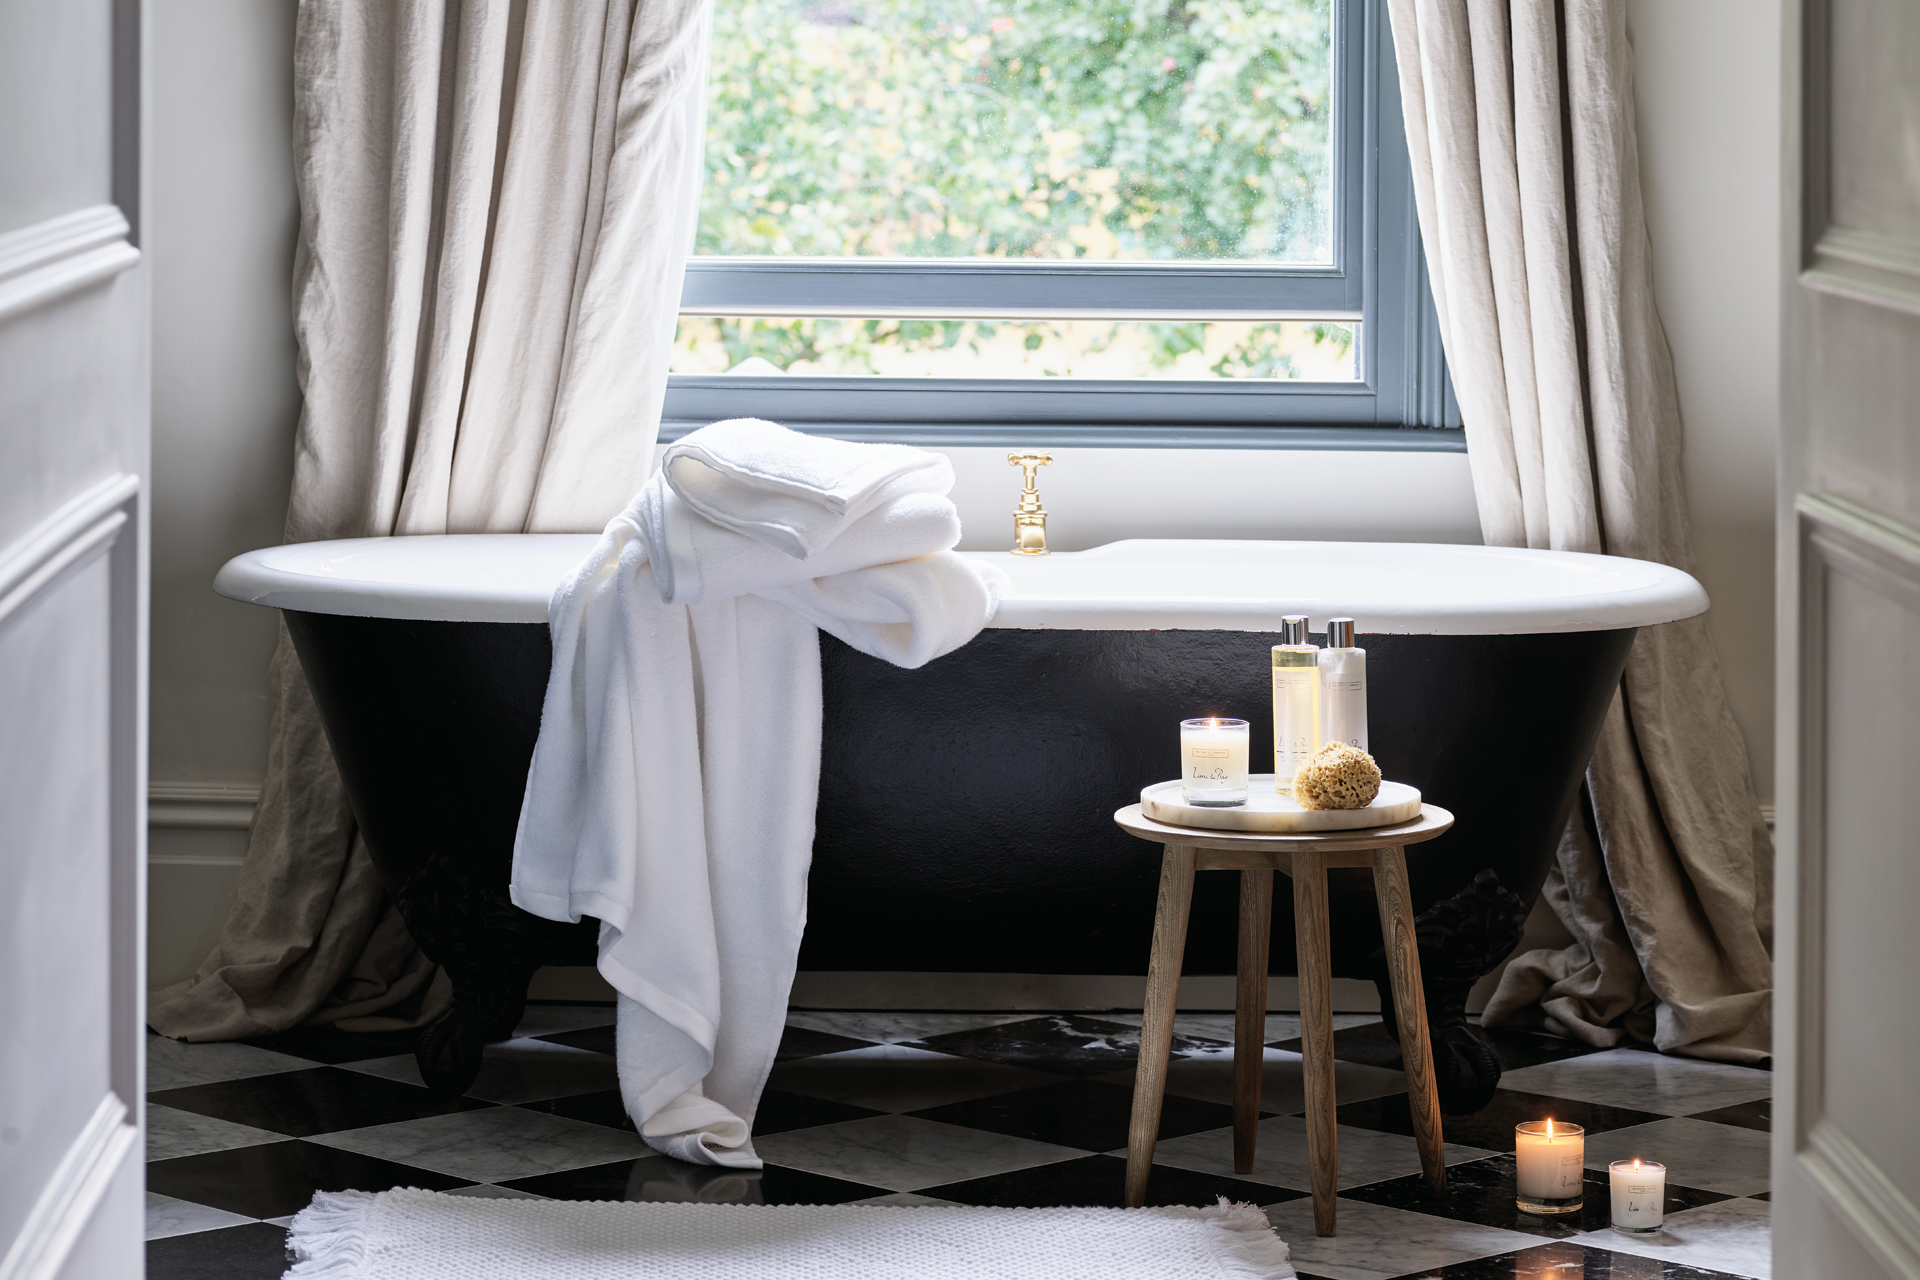 The White Company bathscaping